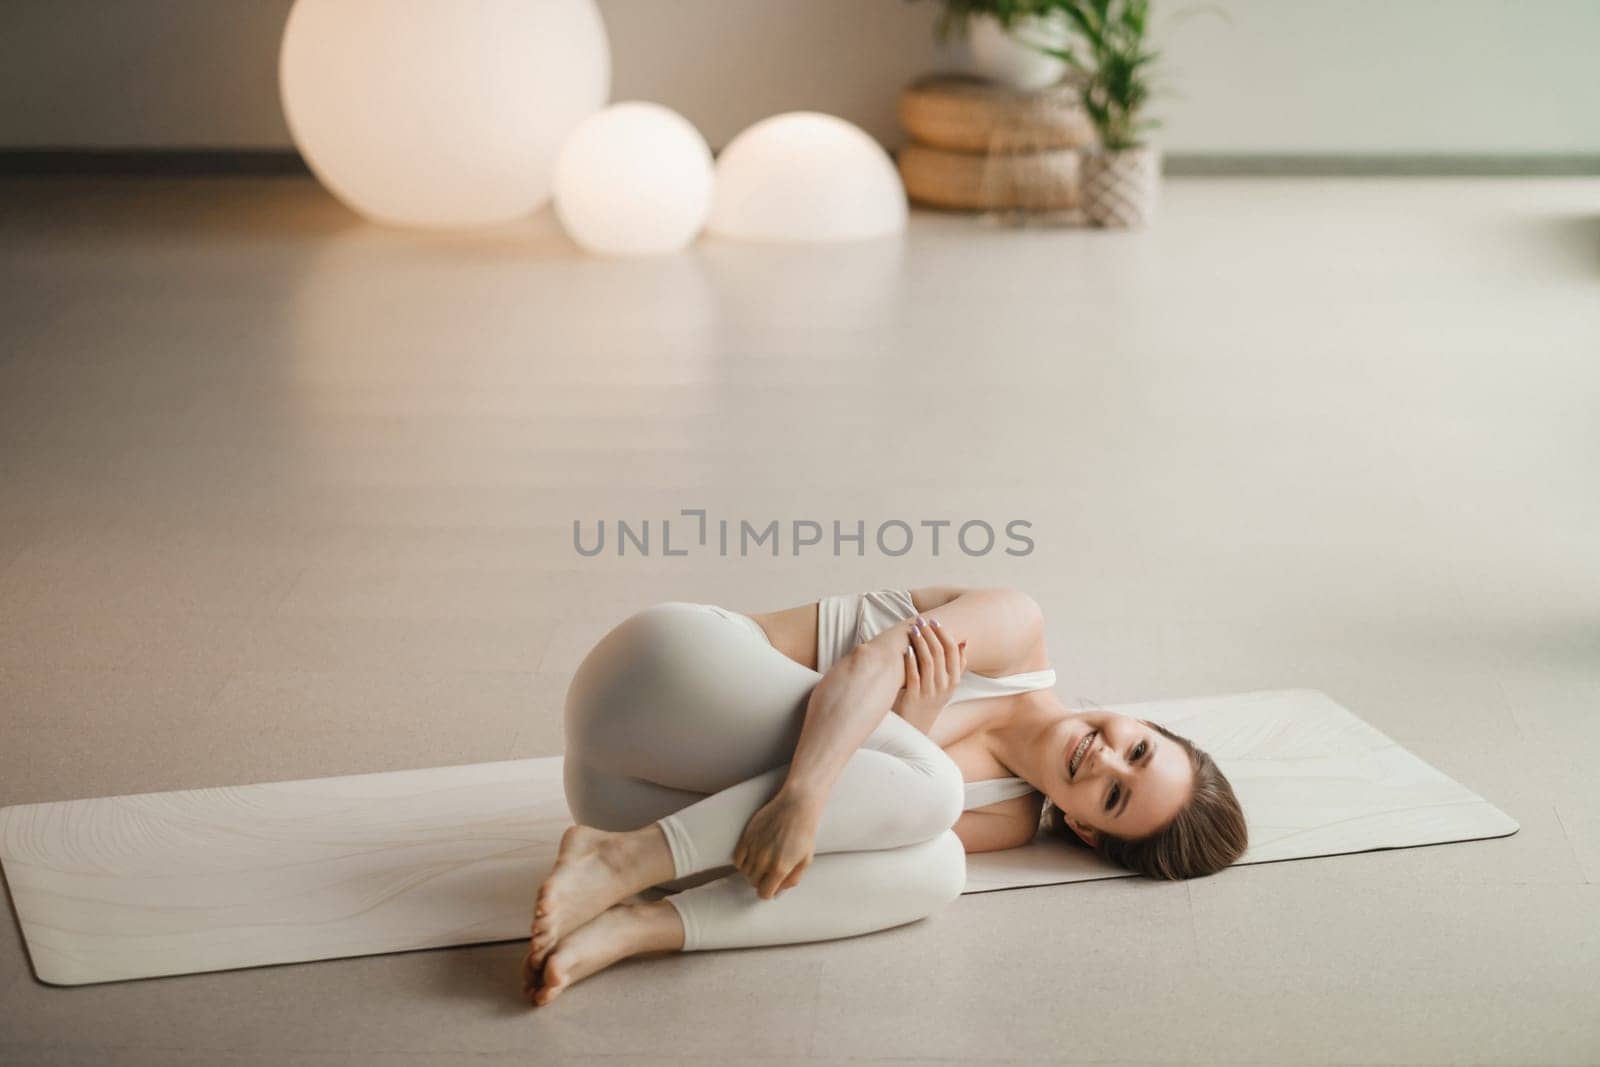 A girl in white clothes does yoga lying on a rug indoors.